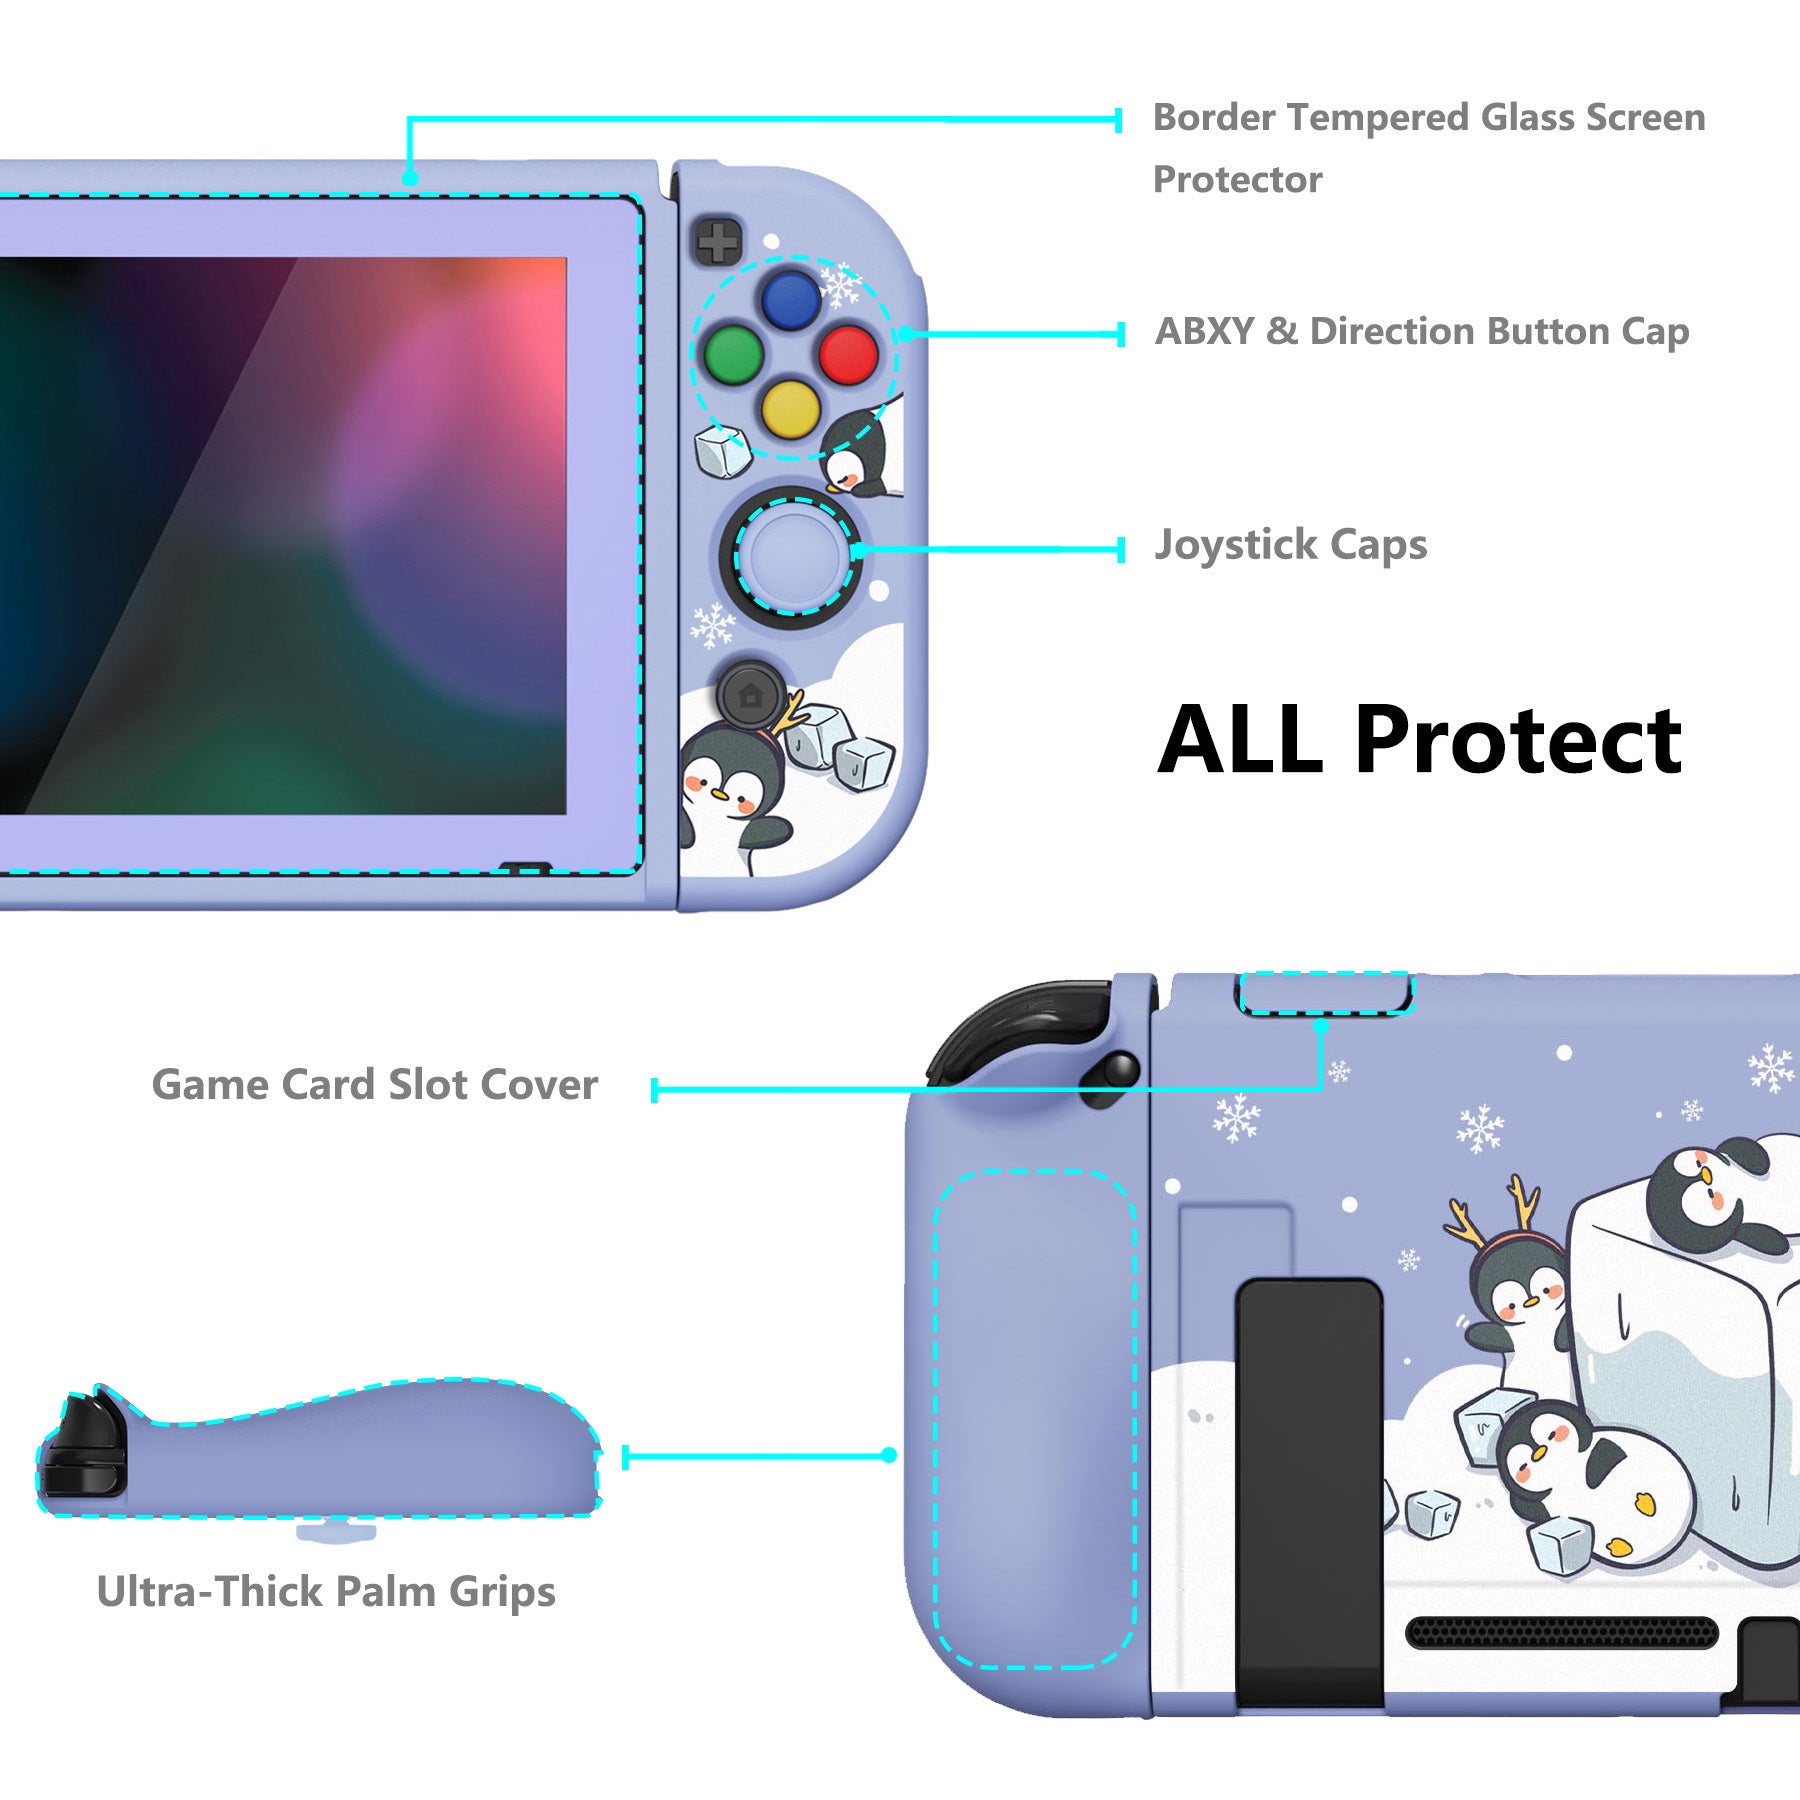 PlayVital ZealProtect Soft Protective Case for Nintendo Switch, Flexible Cover for Switch with Tempered Glass Screen Protector & Thumb Grips & ABXY Direction Button Caps - ICY Cube Penguin - RNSYV6011 playvital